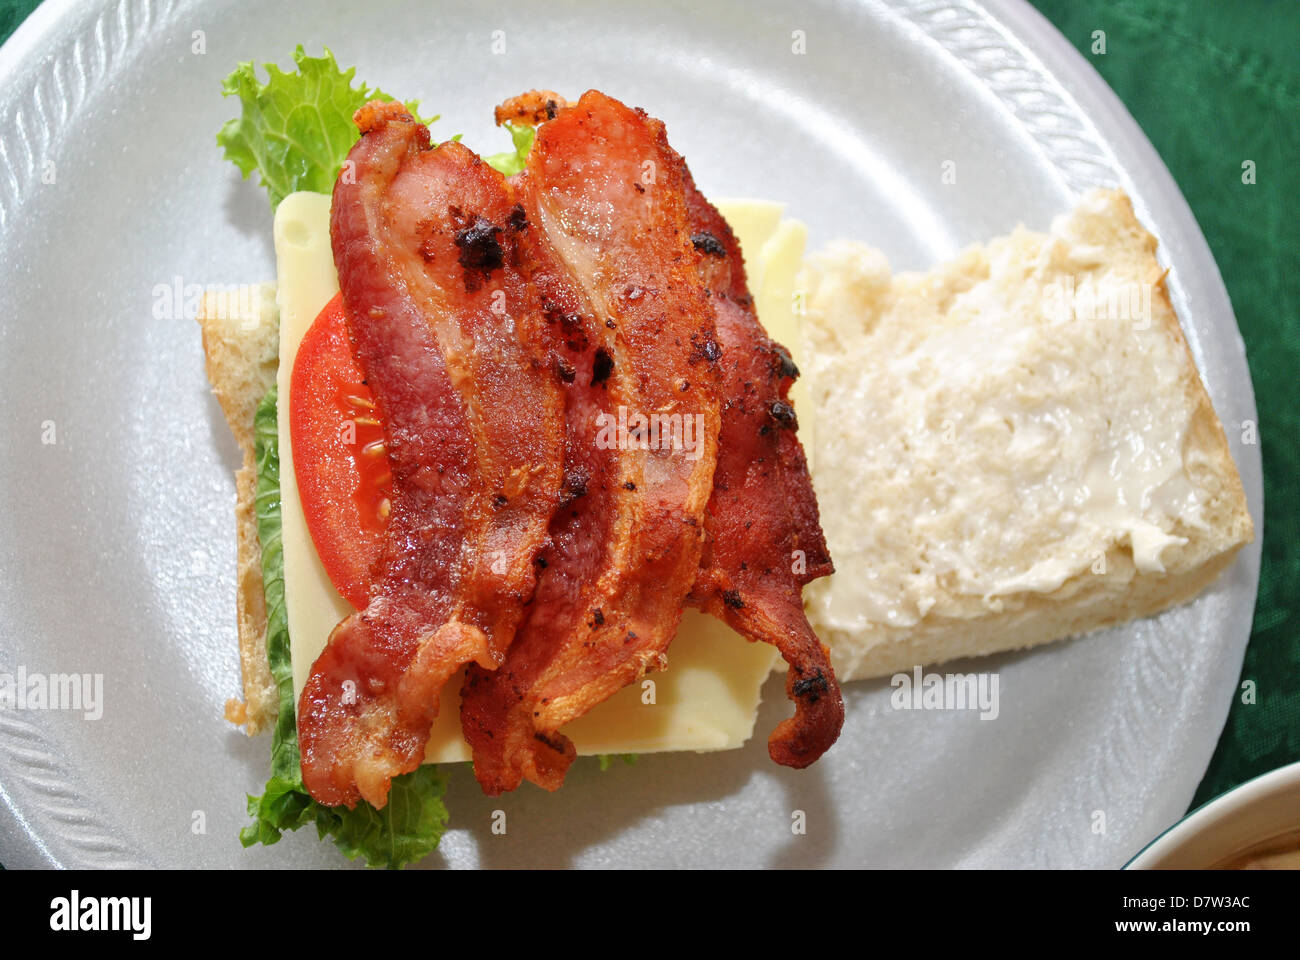 BLT Sandwich for Lunch (Bacon, Lettuce, and Tomato) Stock Photo